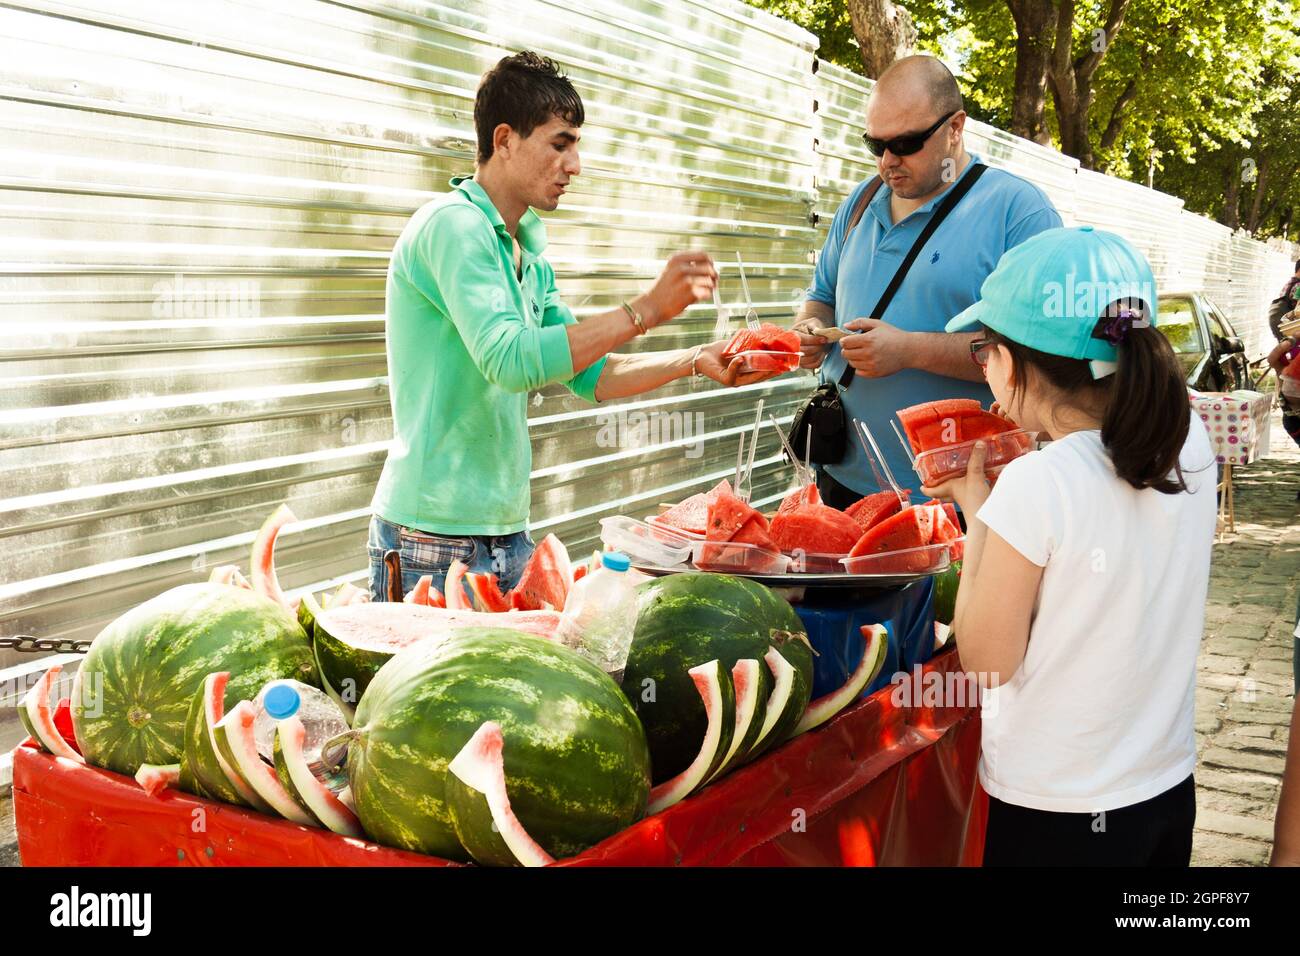 ISTANBUL,TURKEY-JUNE 7:Guys slicing watermelon to sell at their